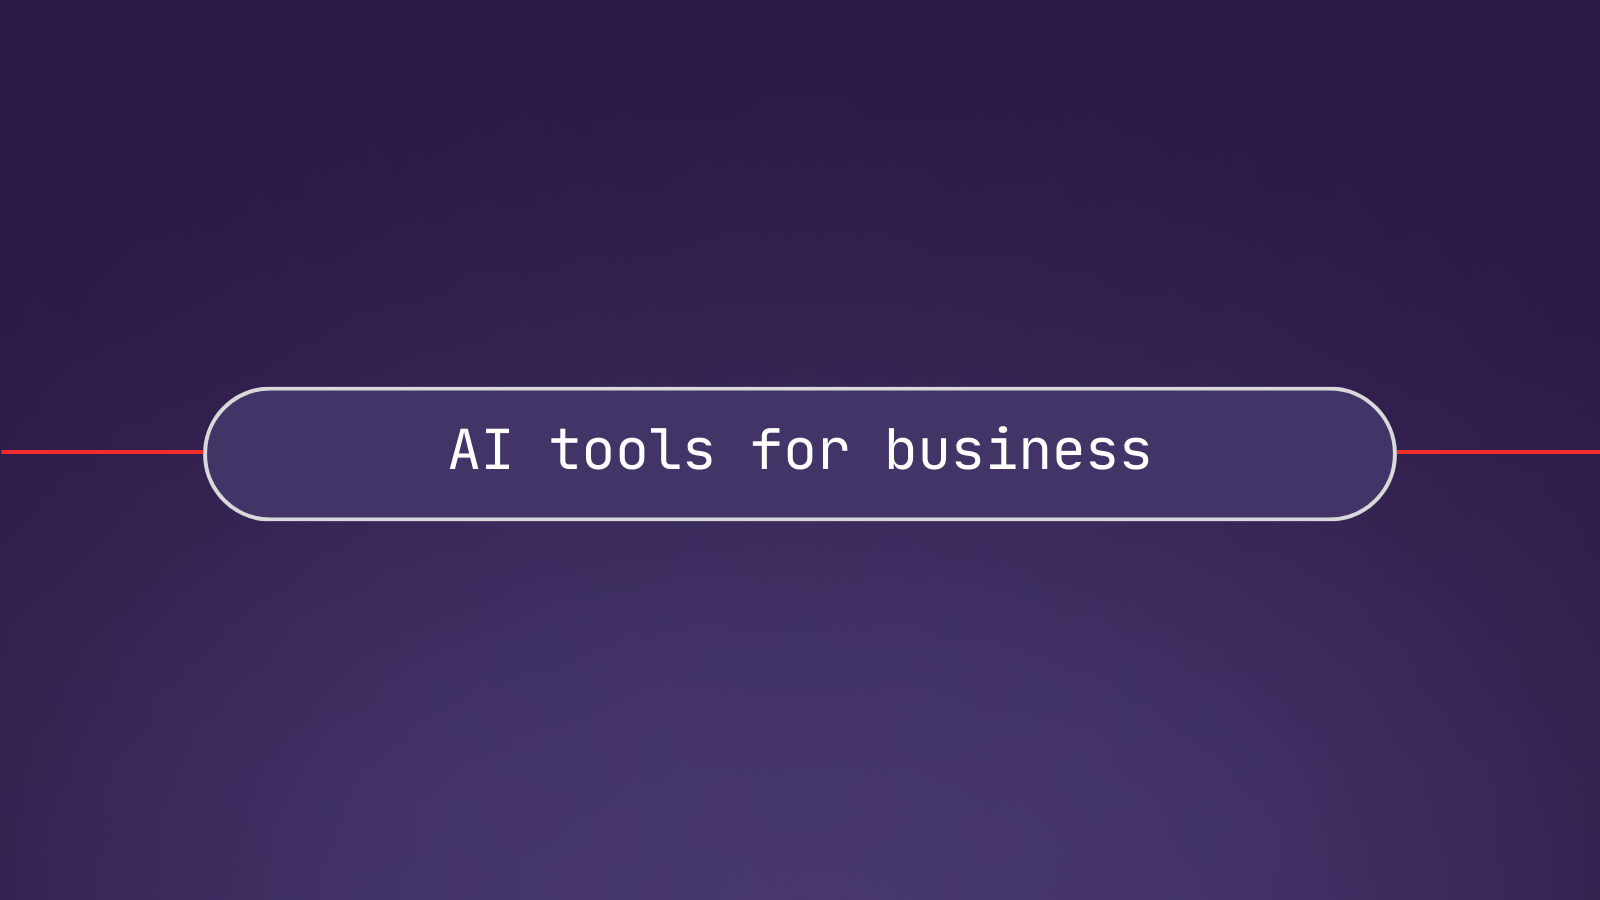 AI tools for business: Top 6 considerations before building with AI models and LLMs